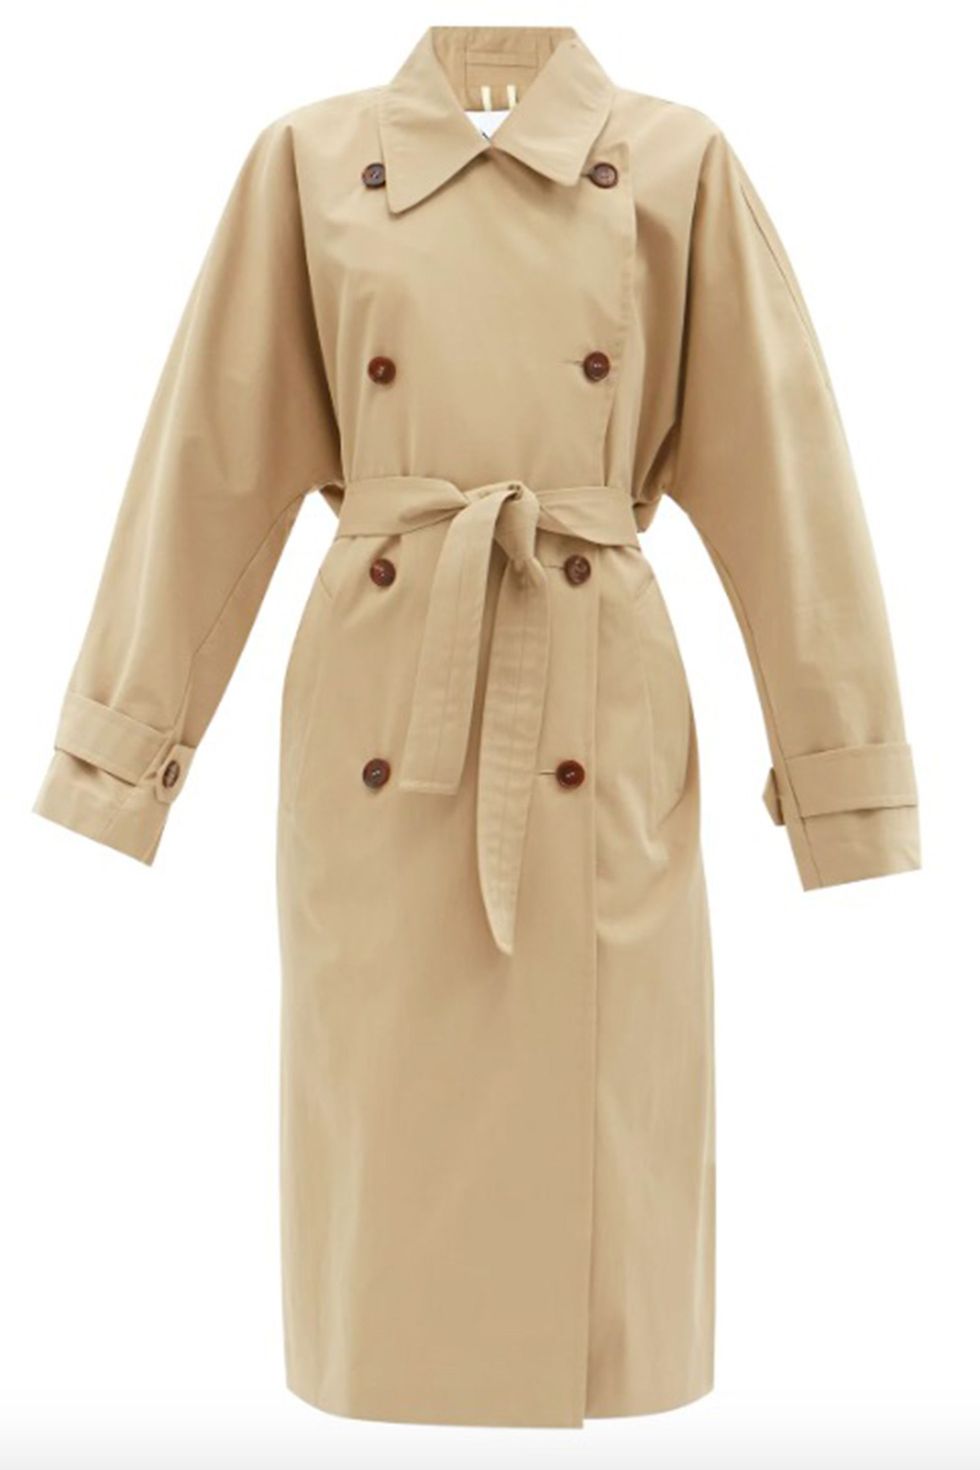 The trench coat 